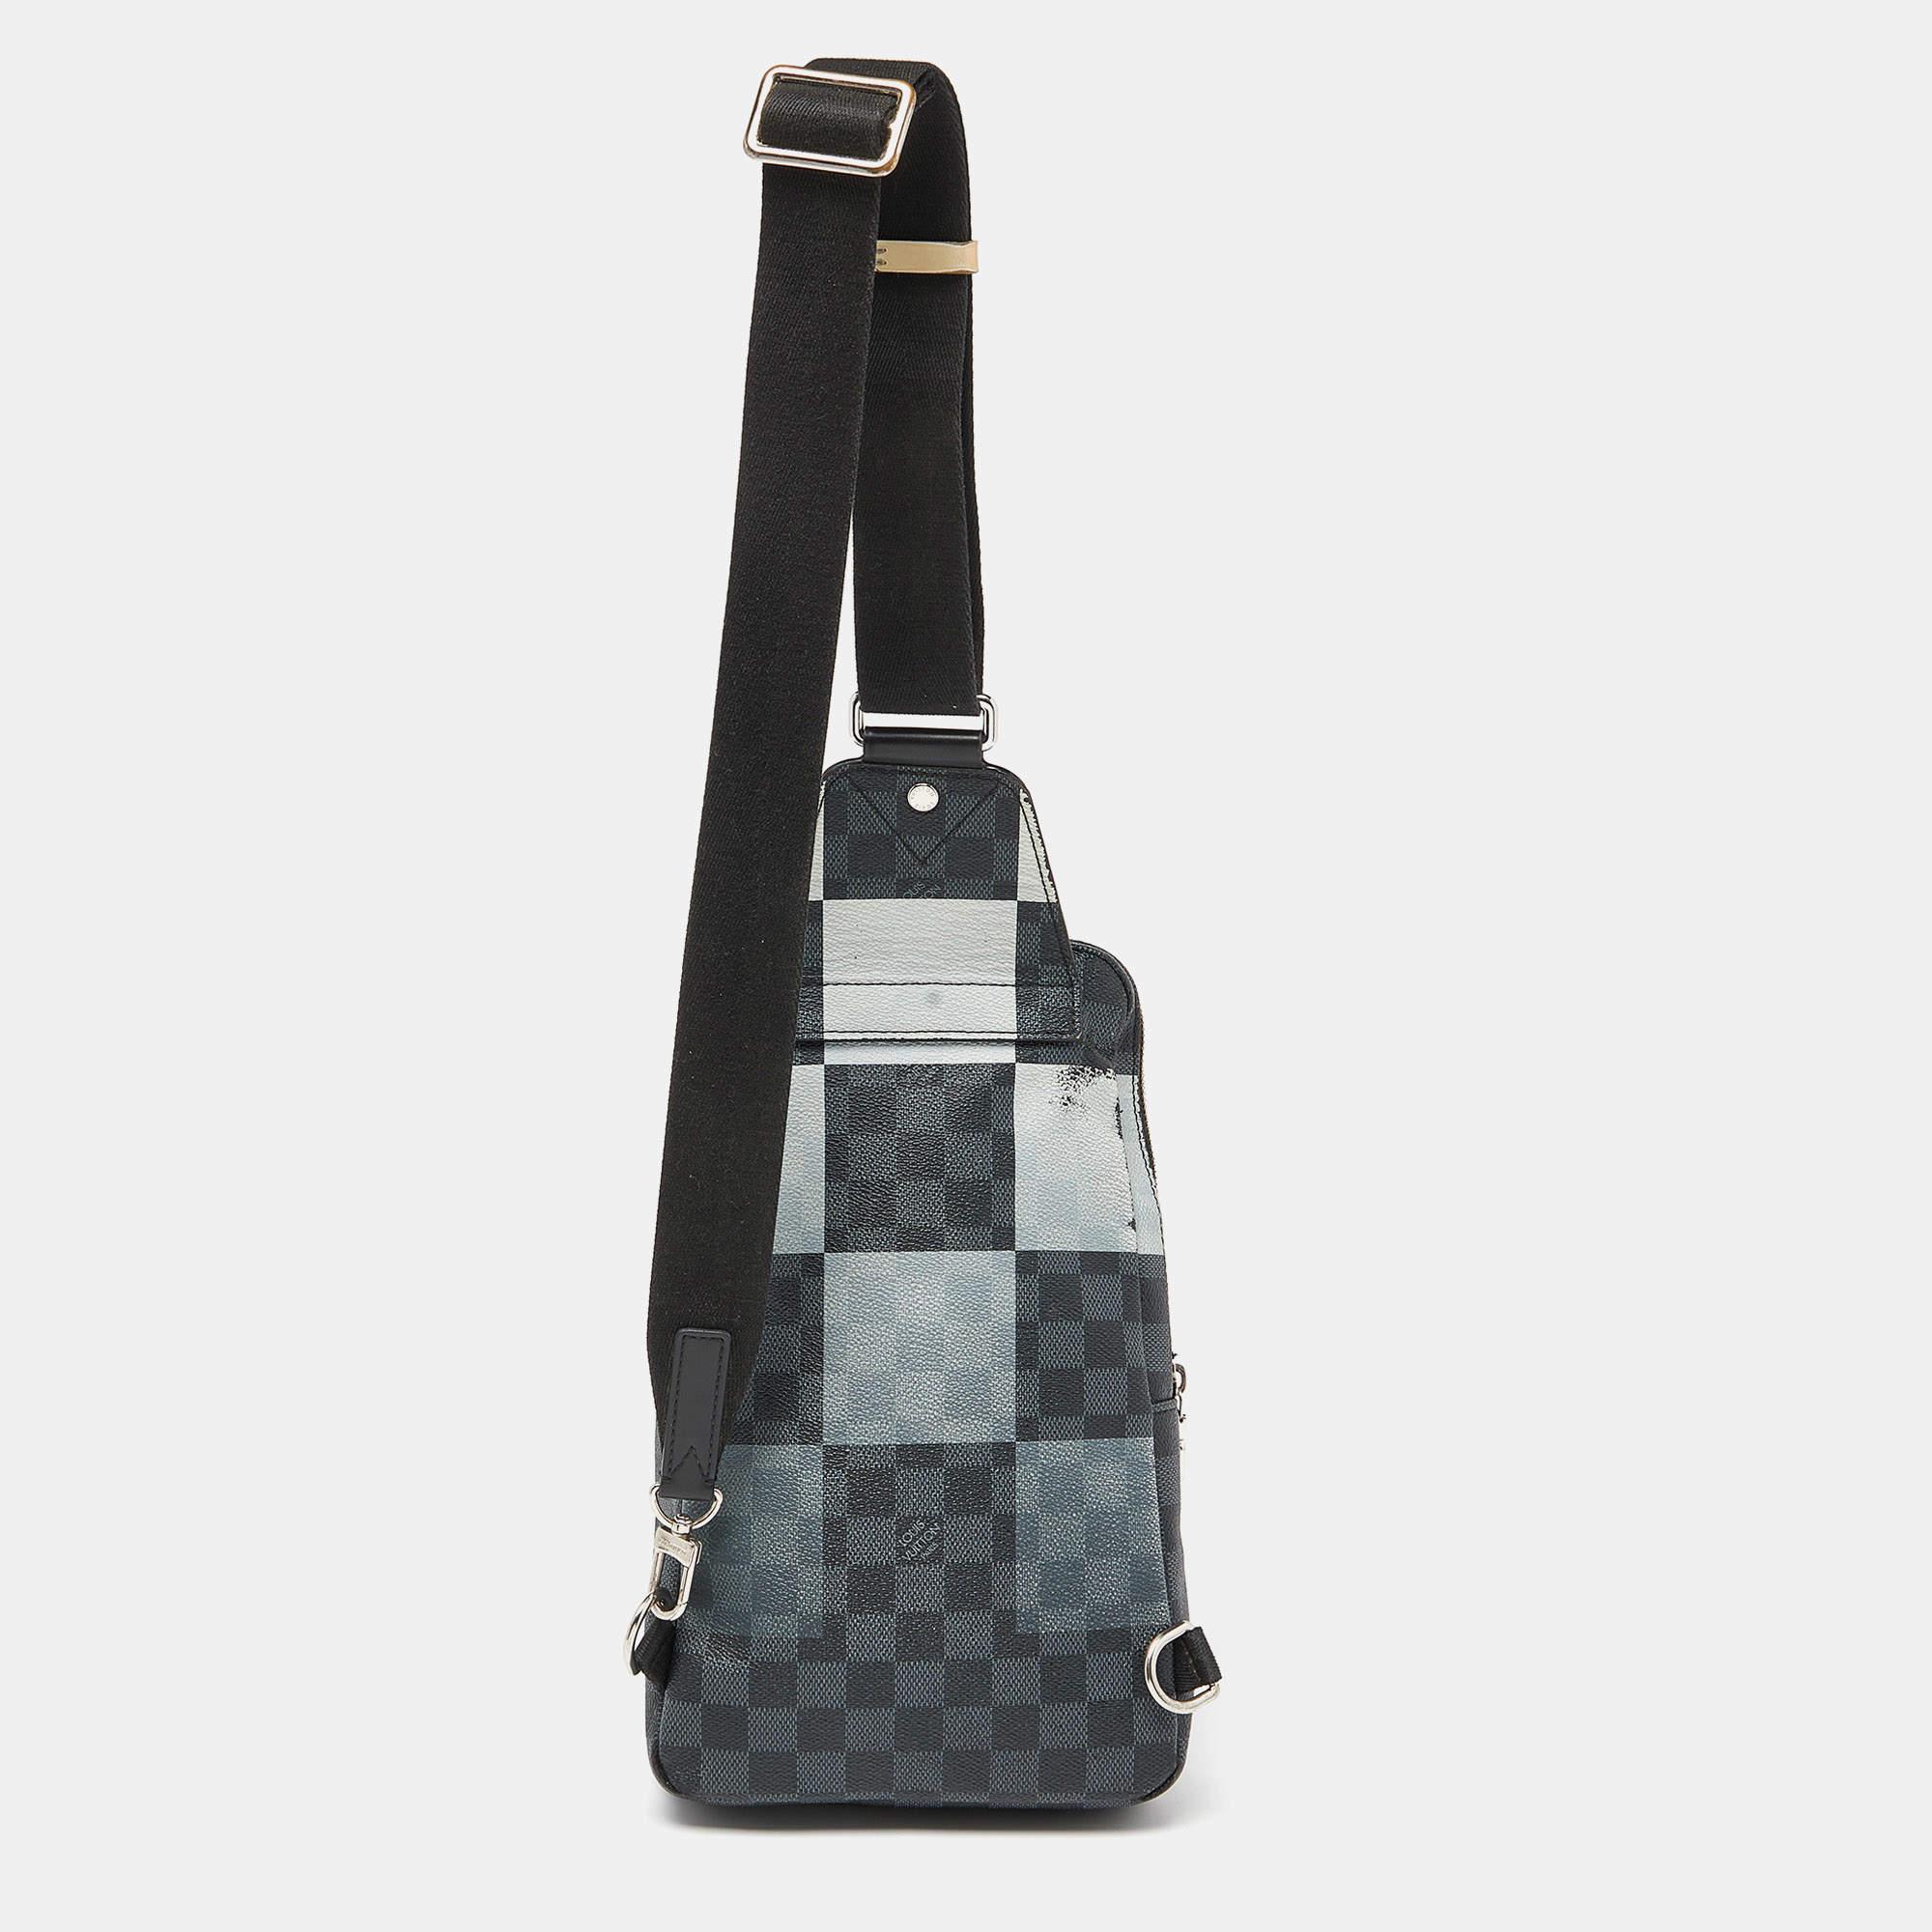 This Louis Vuitton bag will come in handy for daily use or as a style statement. It is crafted from Damier Graphite canvas and designed with a spacious interior secured by a zipper. A single crossbody strap and a front pocket make it ready to be